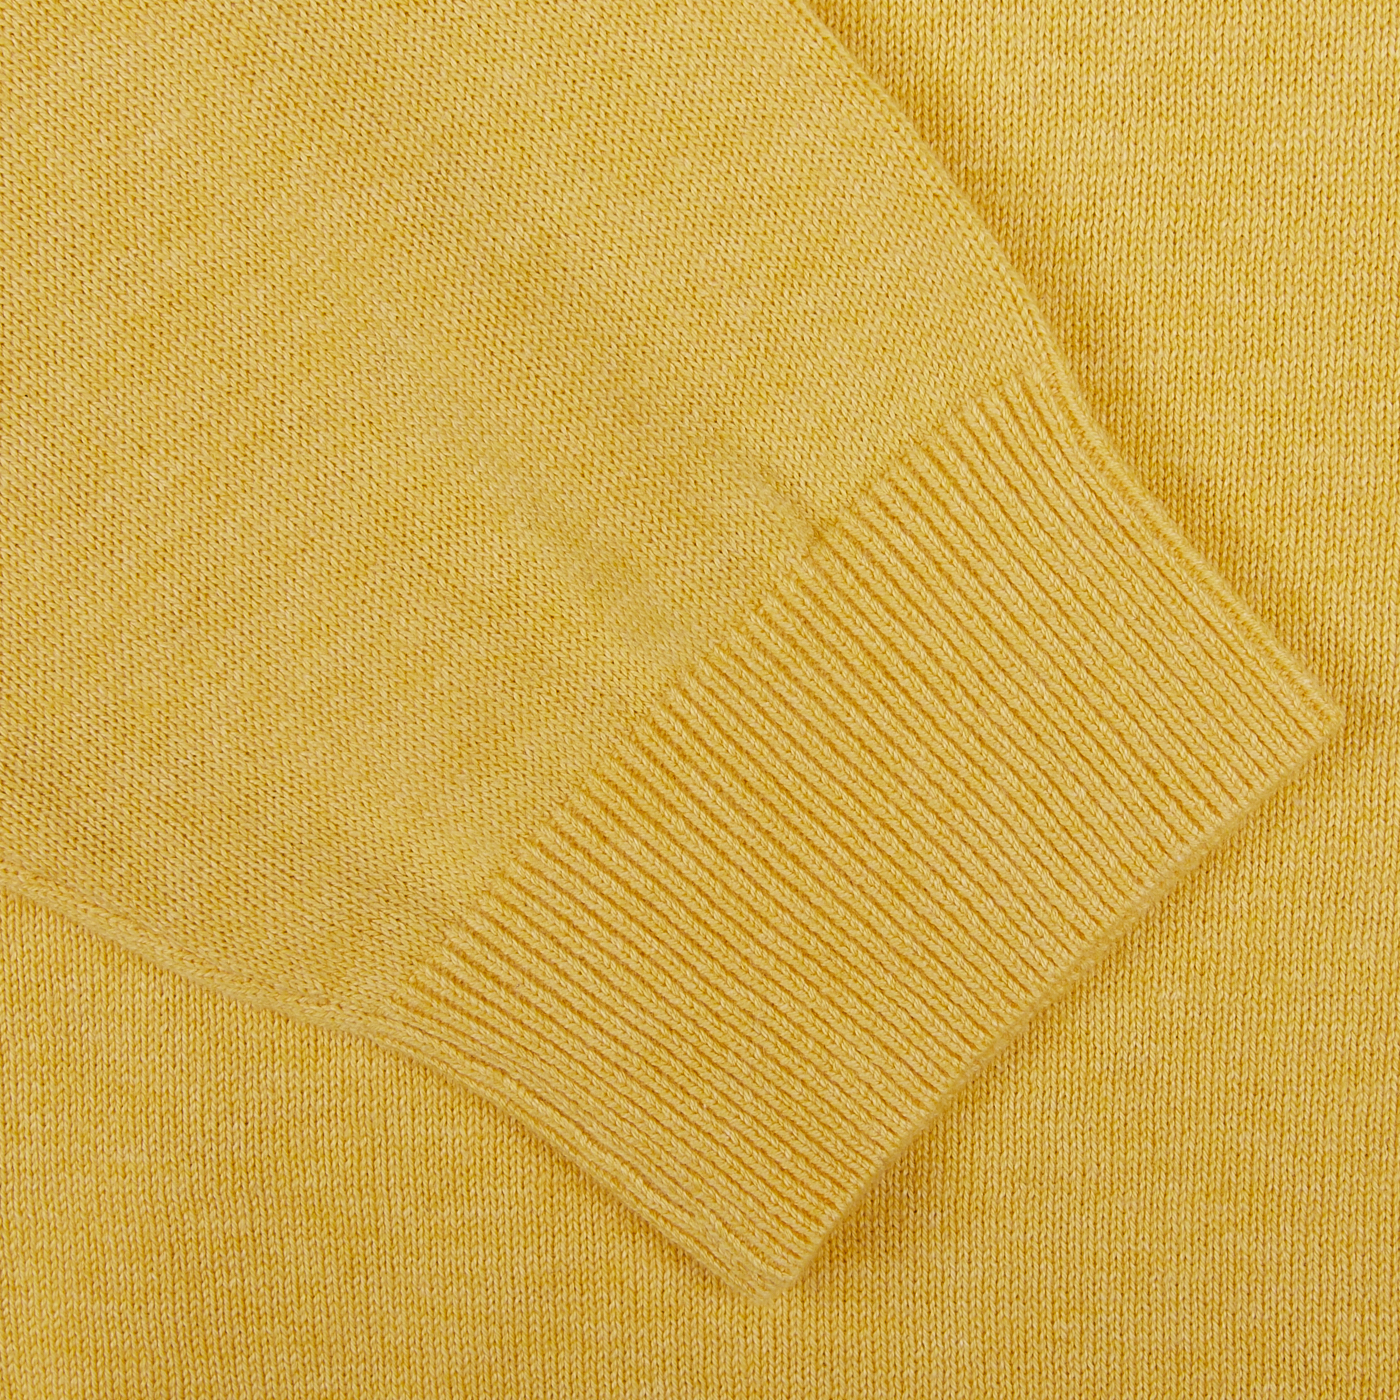 Close-up of an Alan Paine Corn Yellow Luxury Cotton Crewneck with ribbed texture detailing.